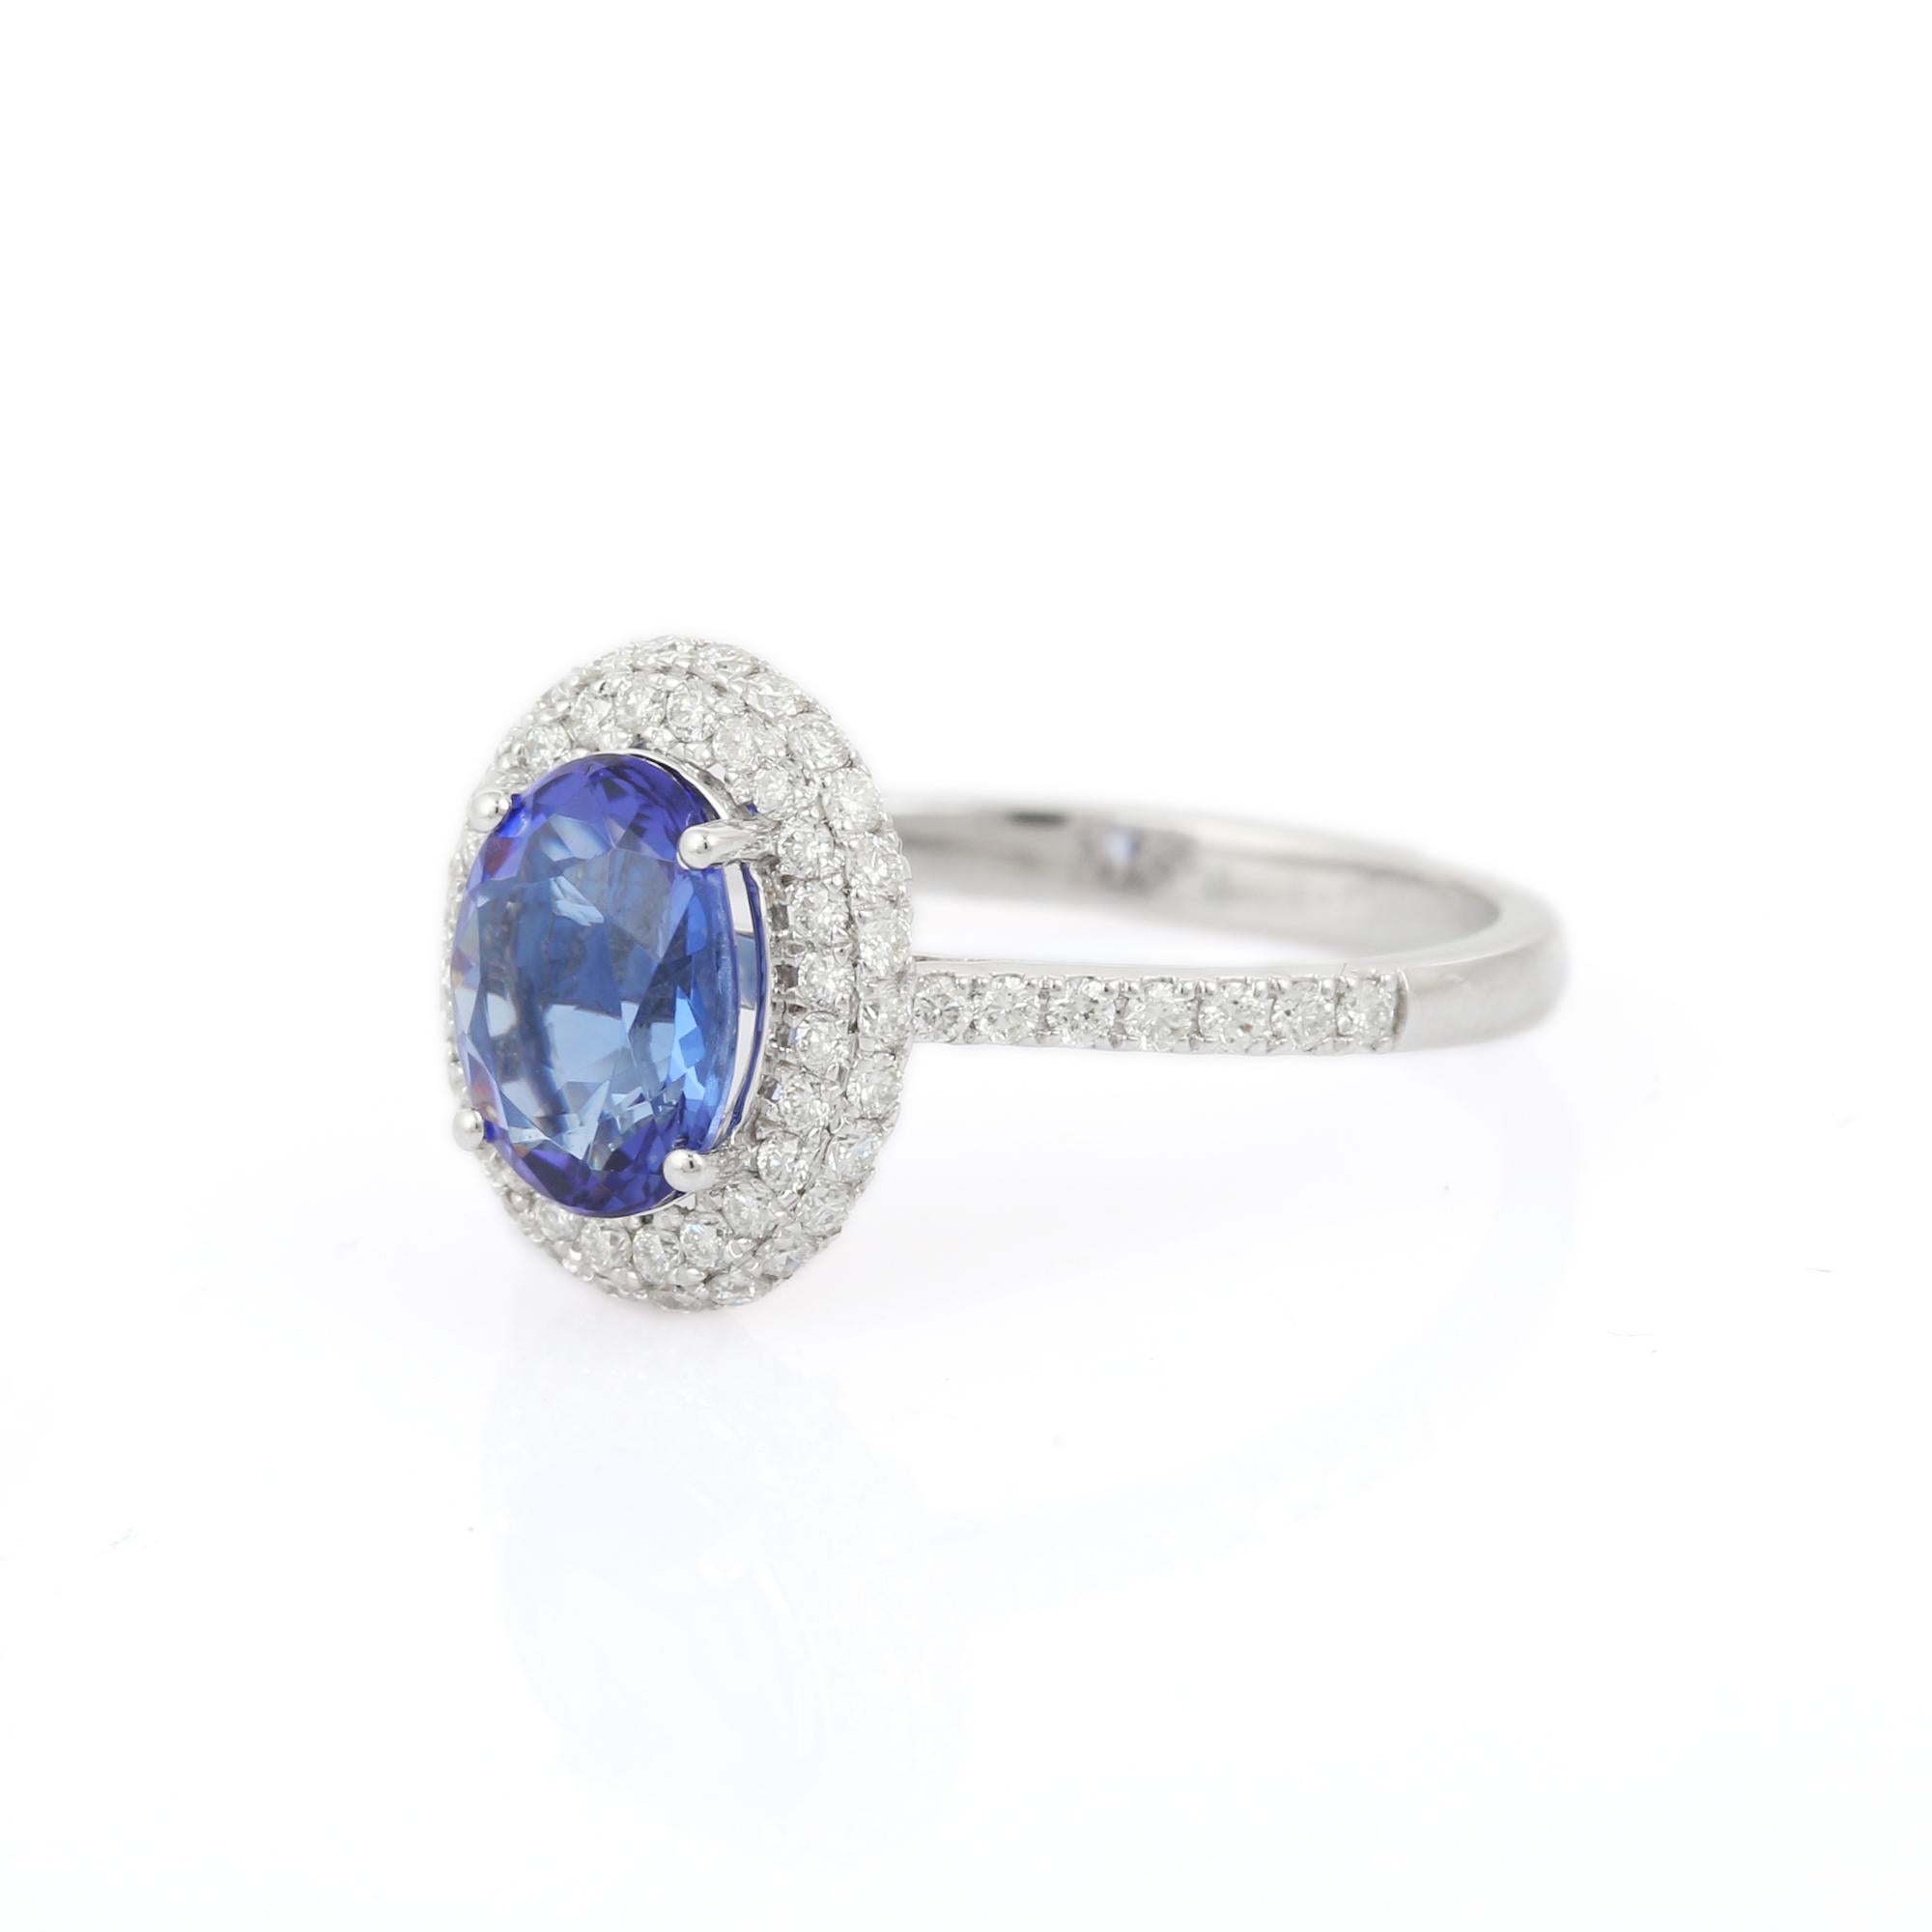 For Sale:  Statement 18 Karat Solid White Gold Tanzanite Ring with Diamonds 2